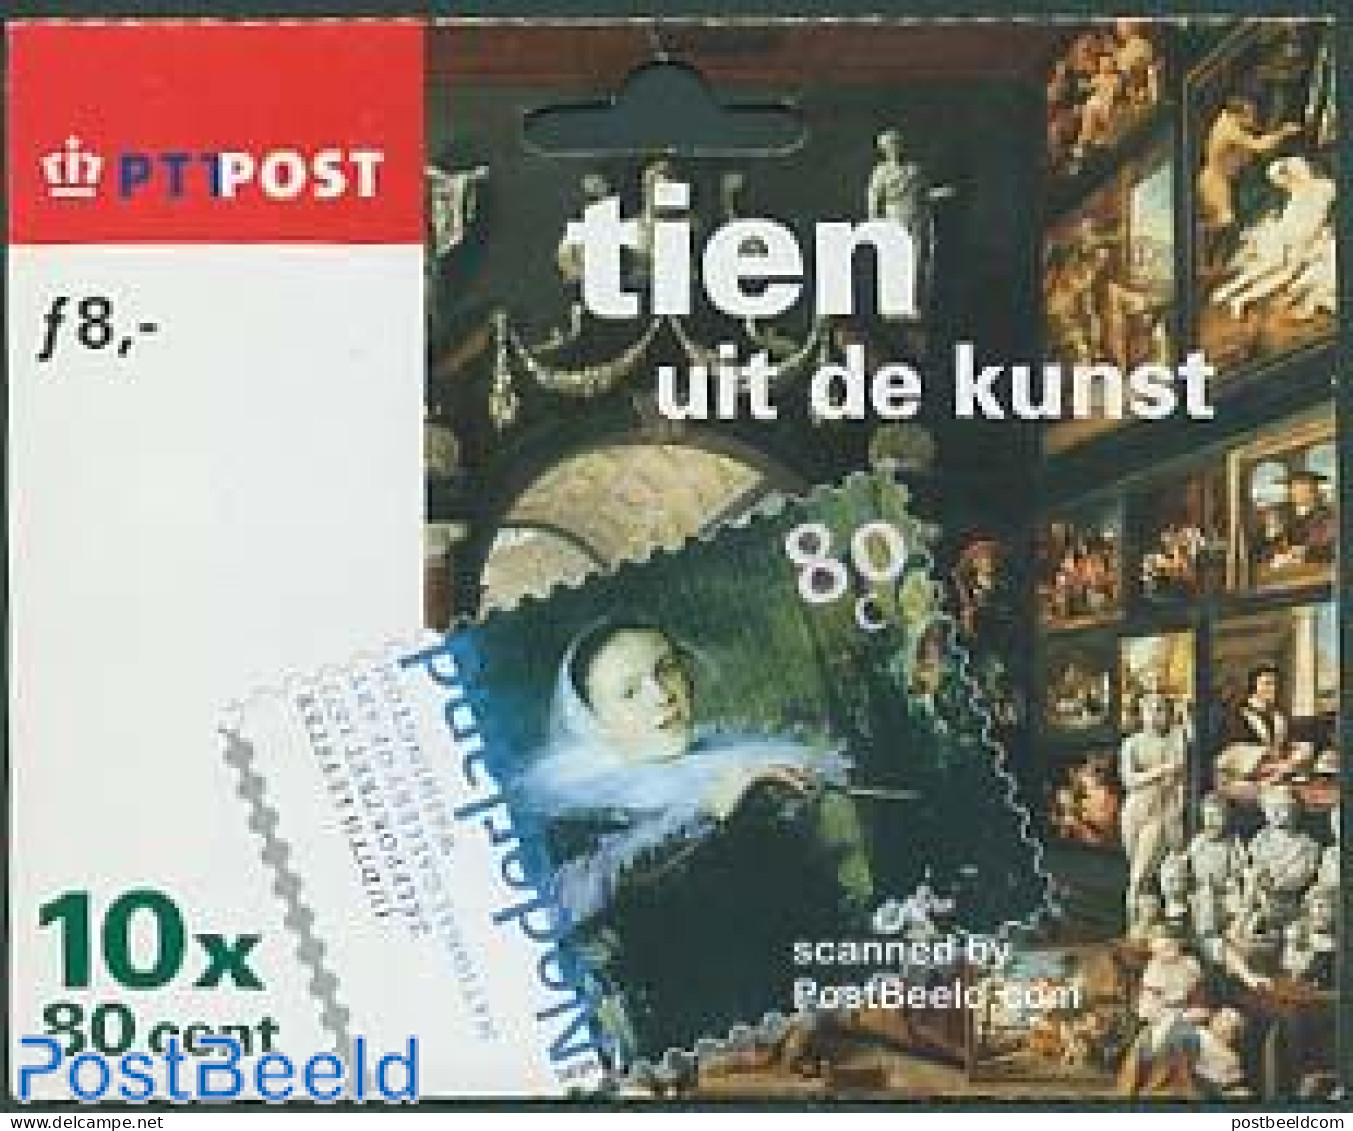 Netherlands 1999 Tien Uit De Kunst Hang-pack, Wrong Colours On Cove, Mint NH, Stamp Booklets - Art - Paintings - Unused Stamps